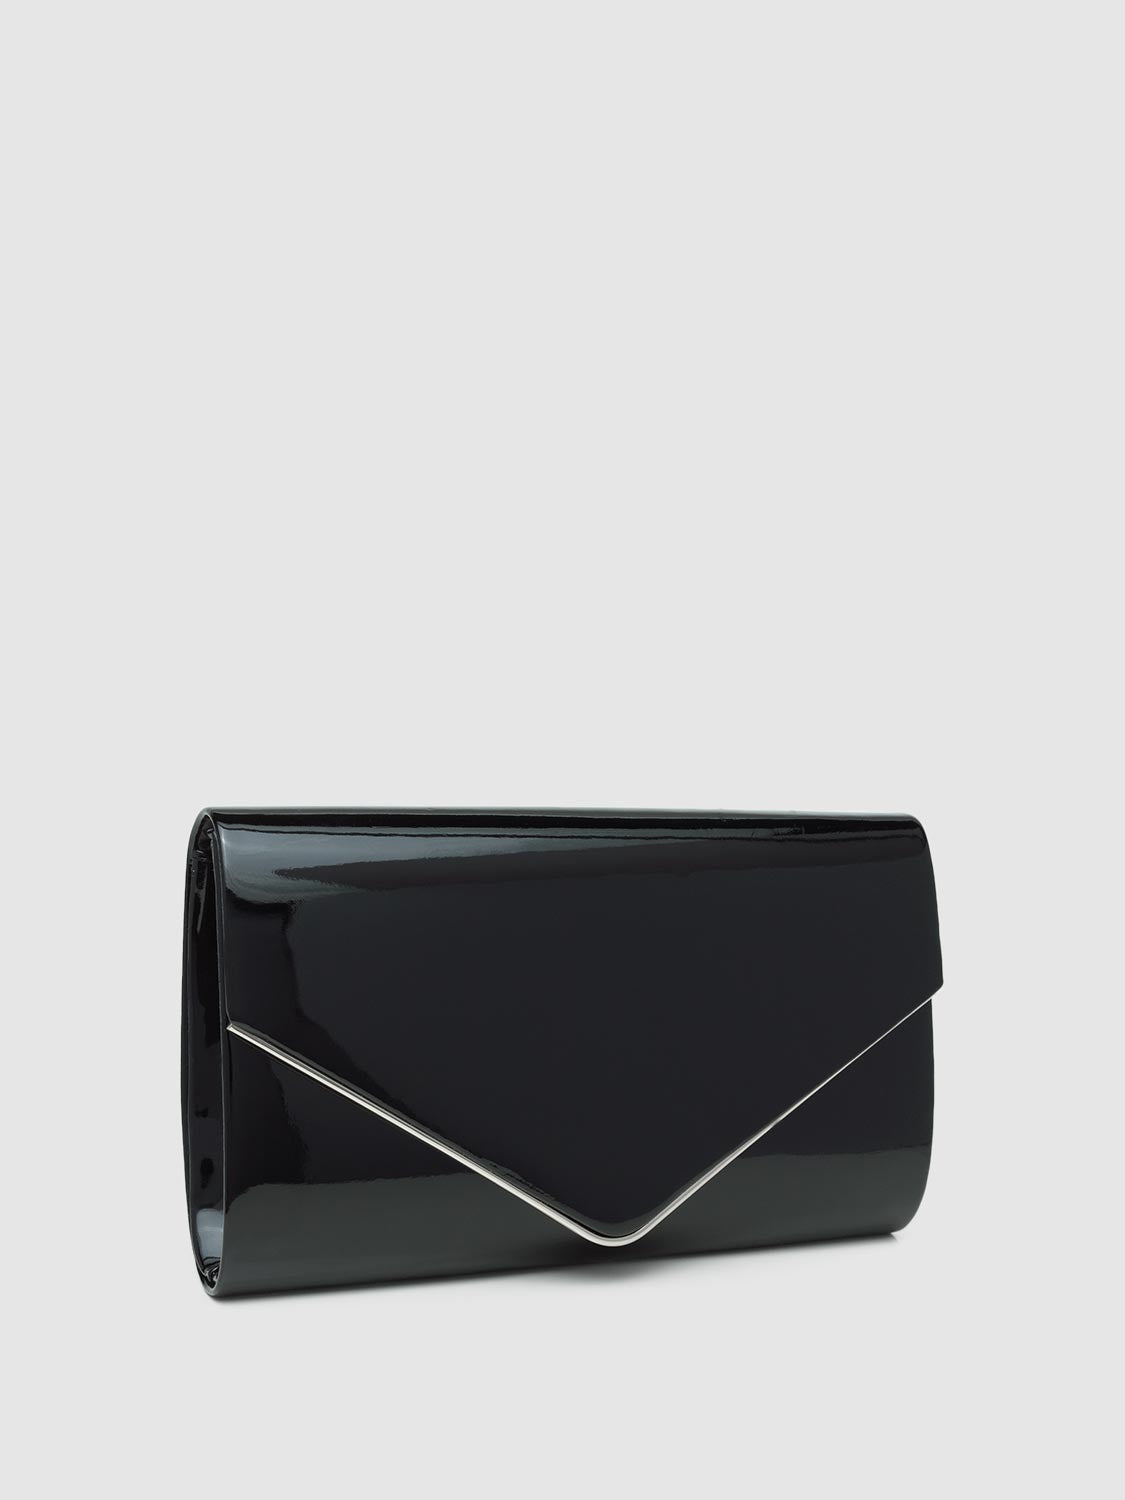 Patent Faux Leather Envelope Clutch With Metal Trim